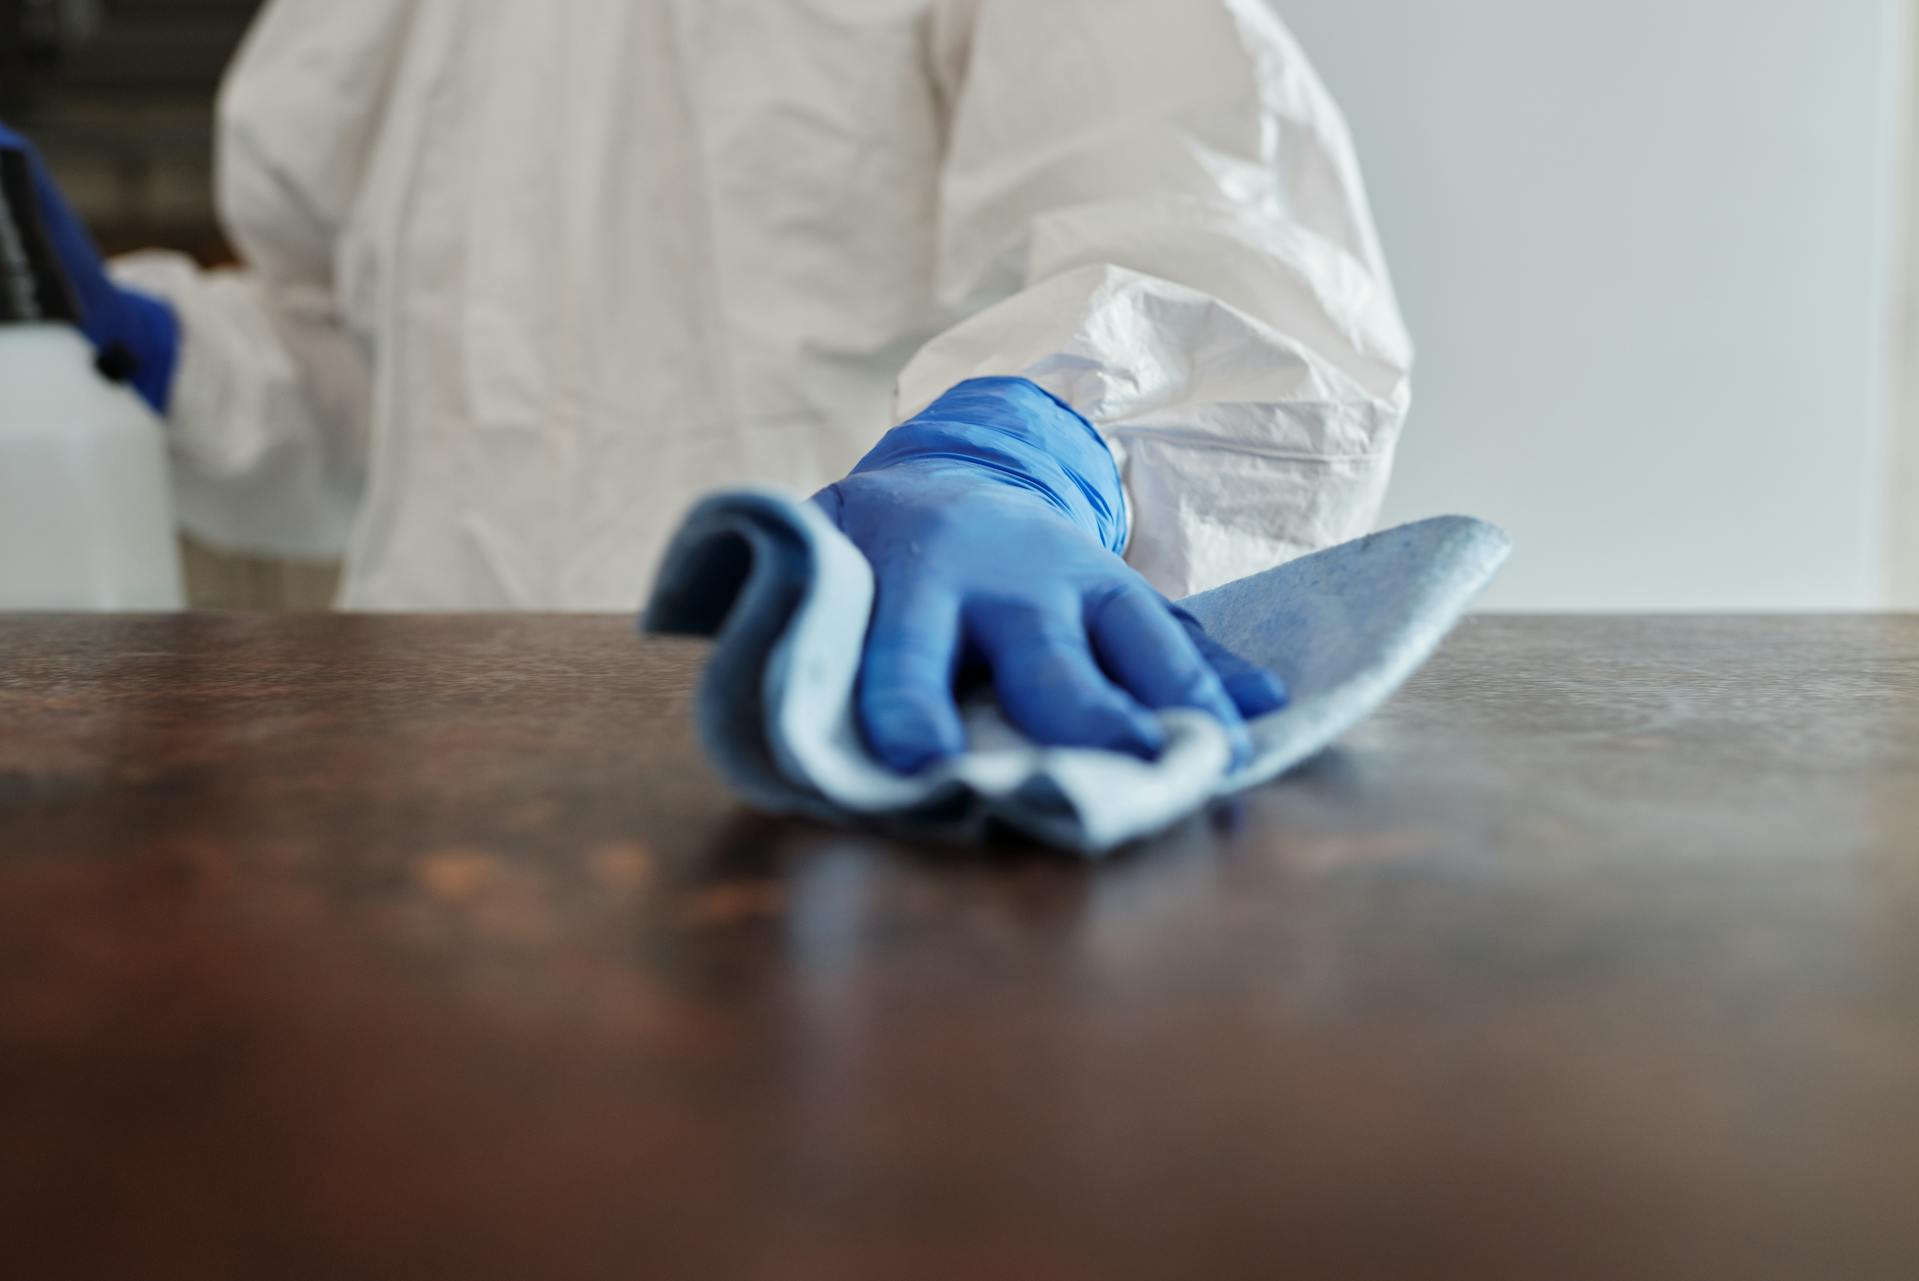 A gloved hand cleaning a furniture surface with a blue cloth.